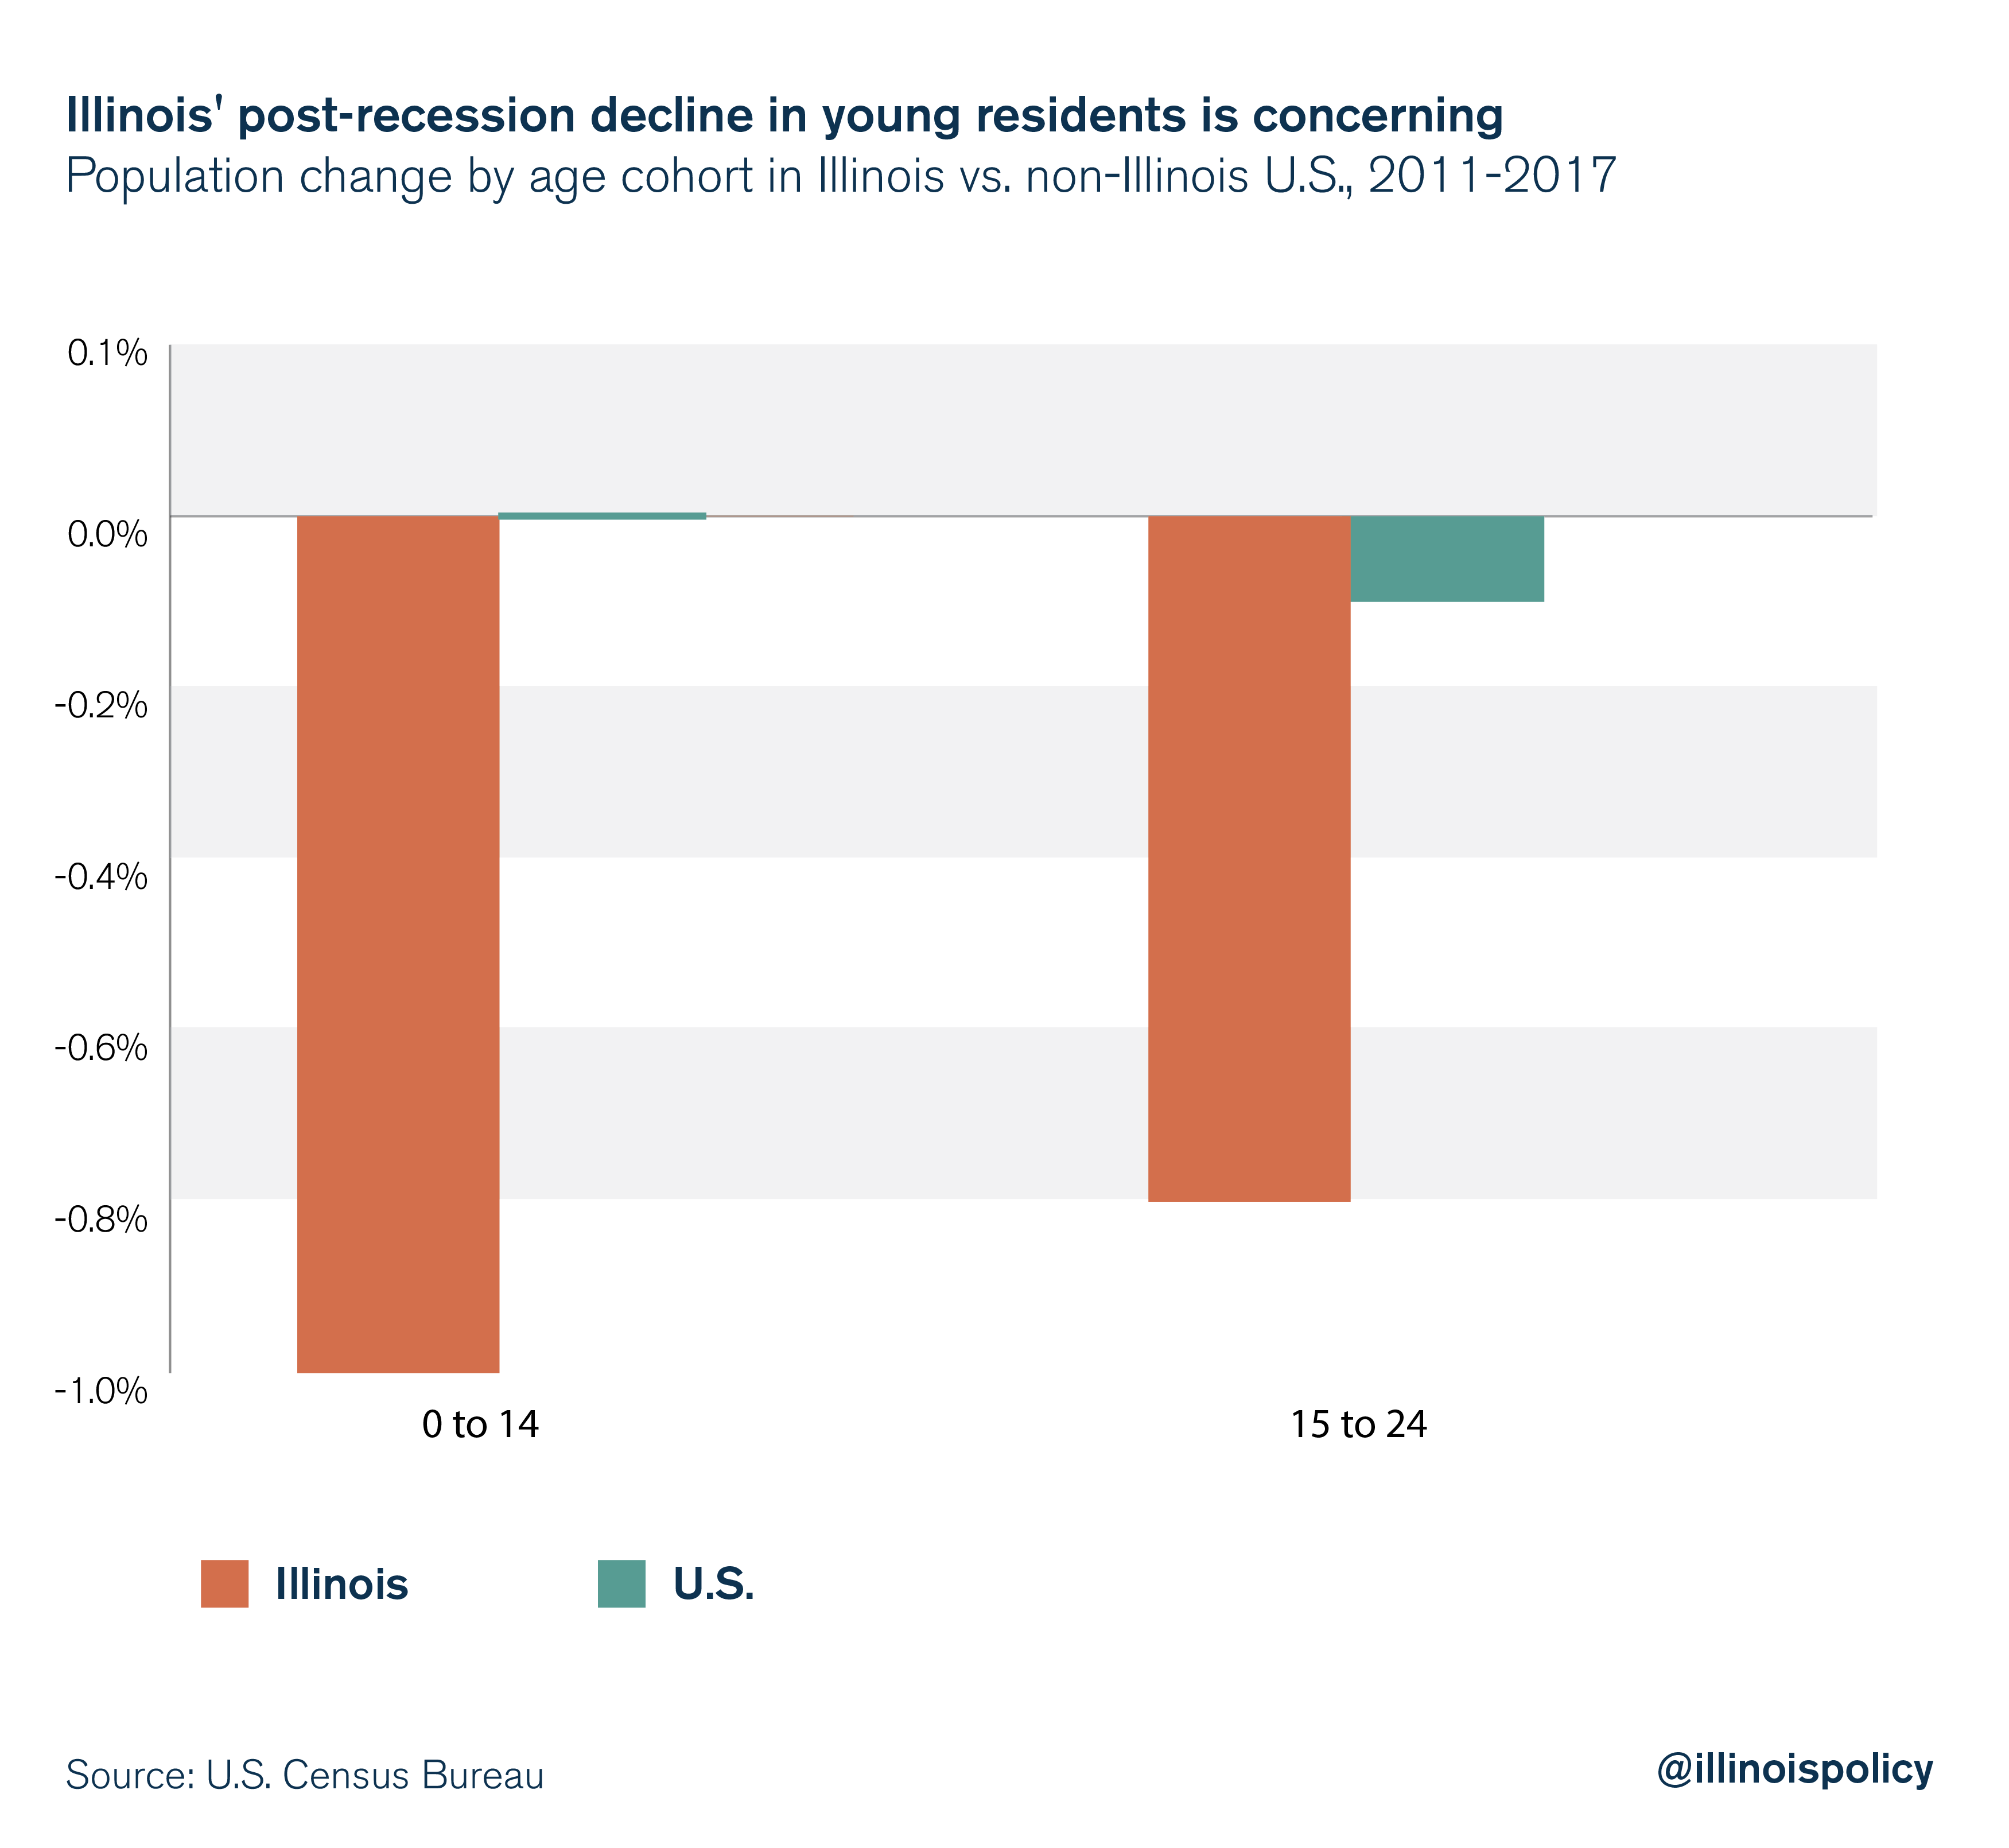 Illinois' post-recession decline in young residents is concerning